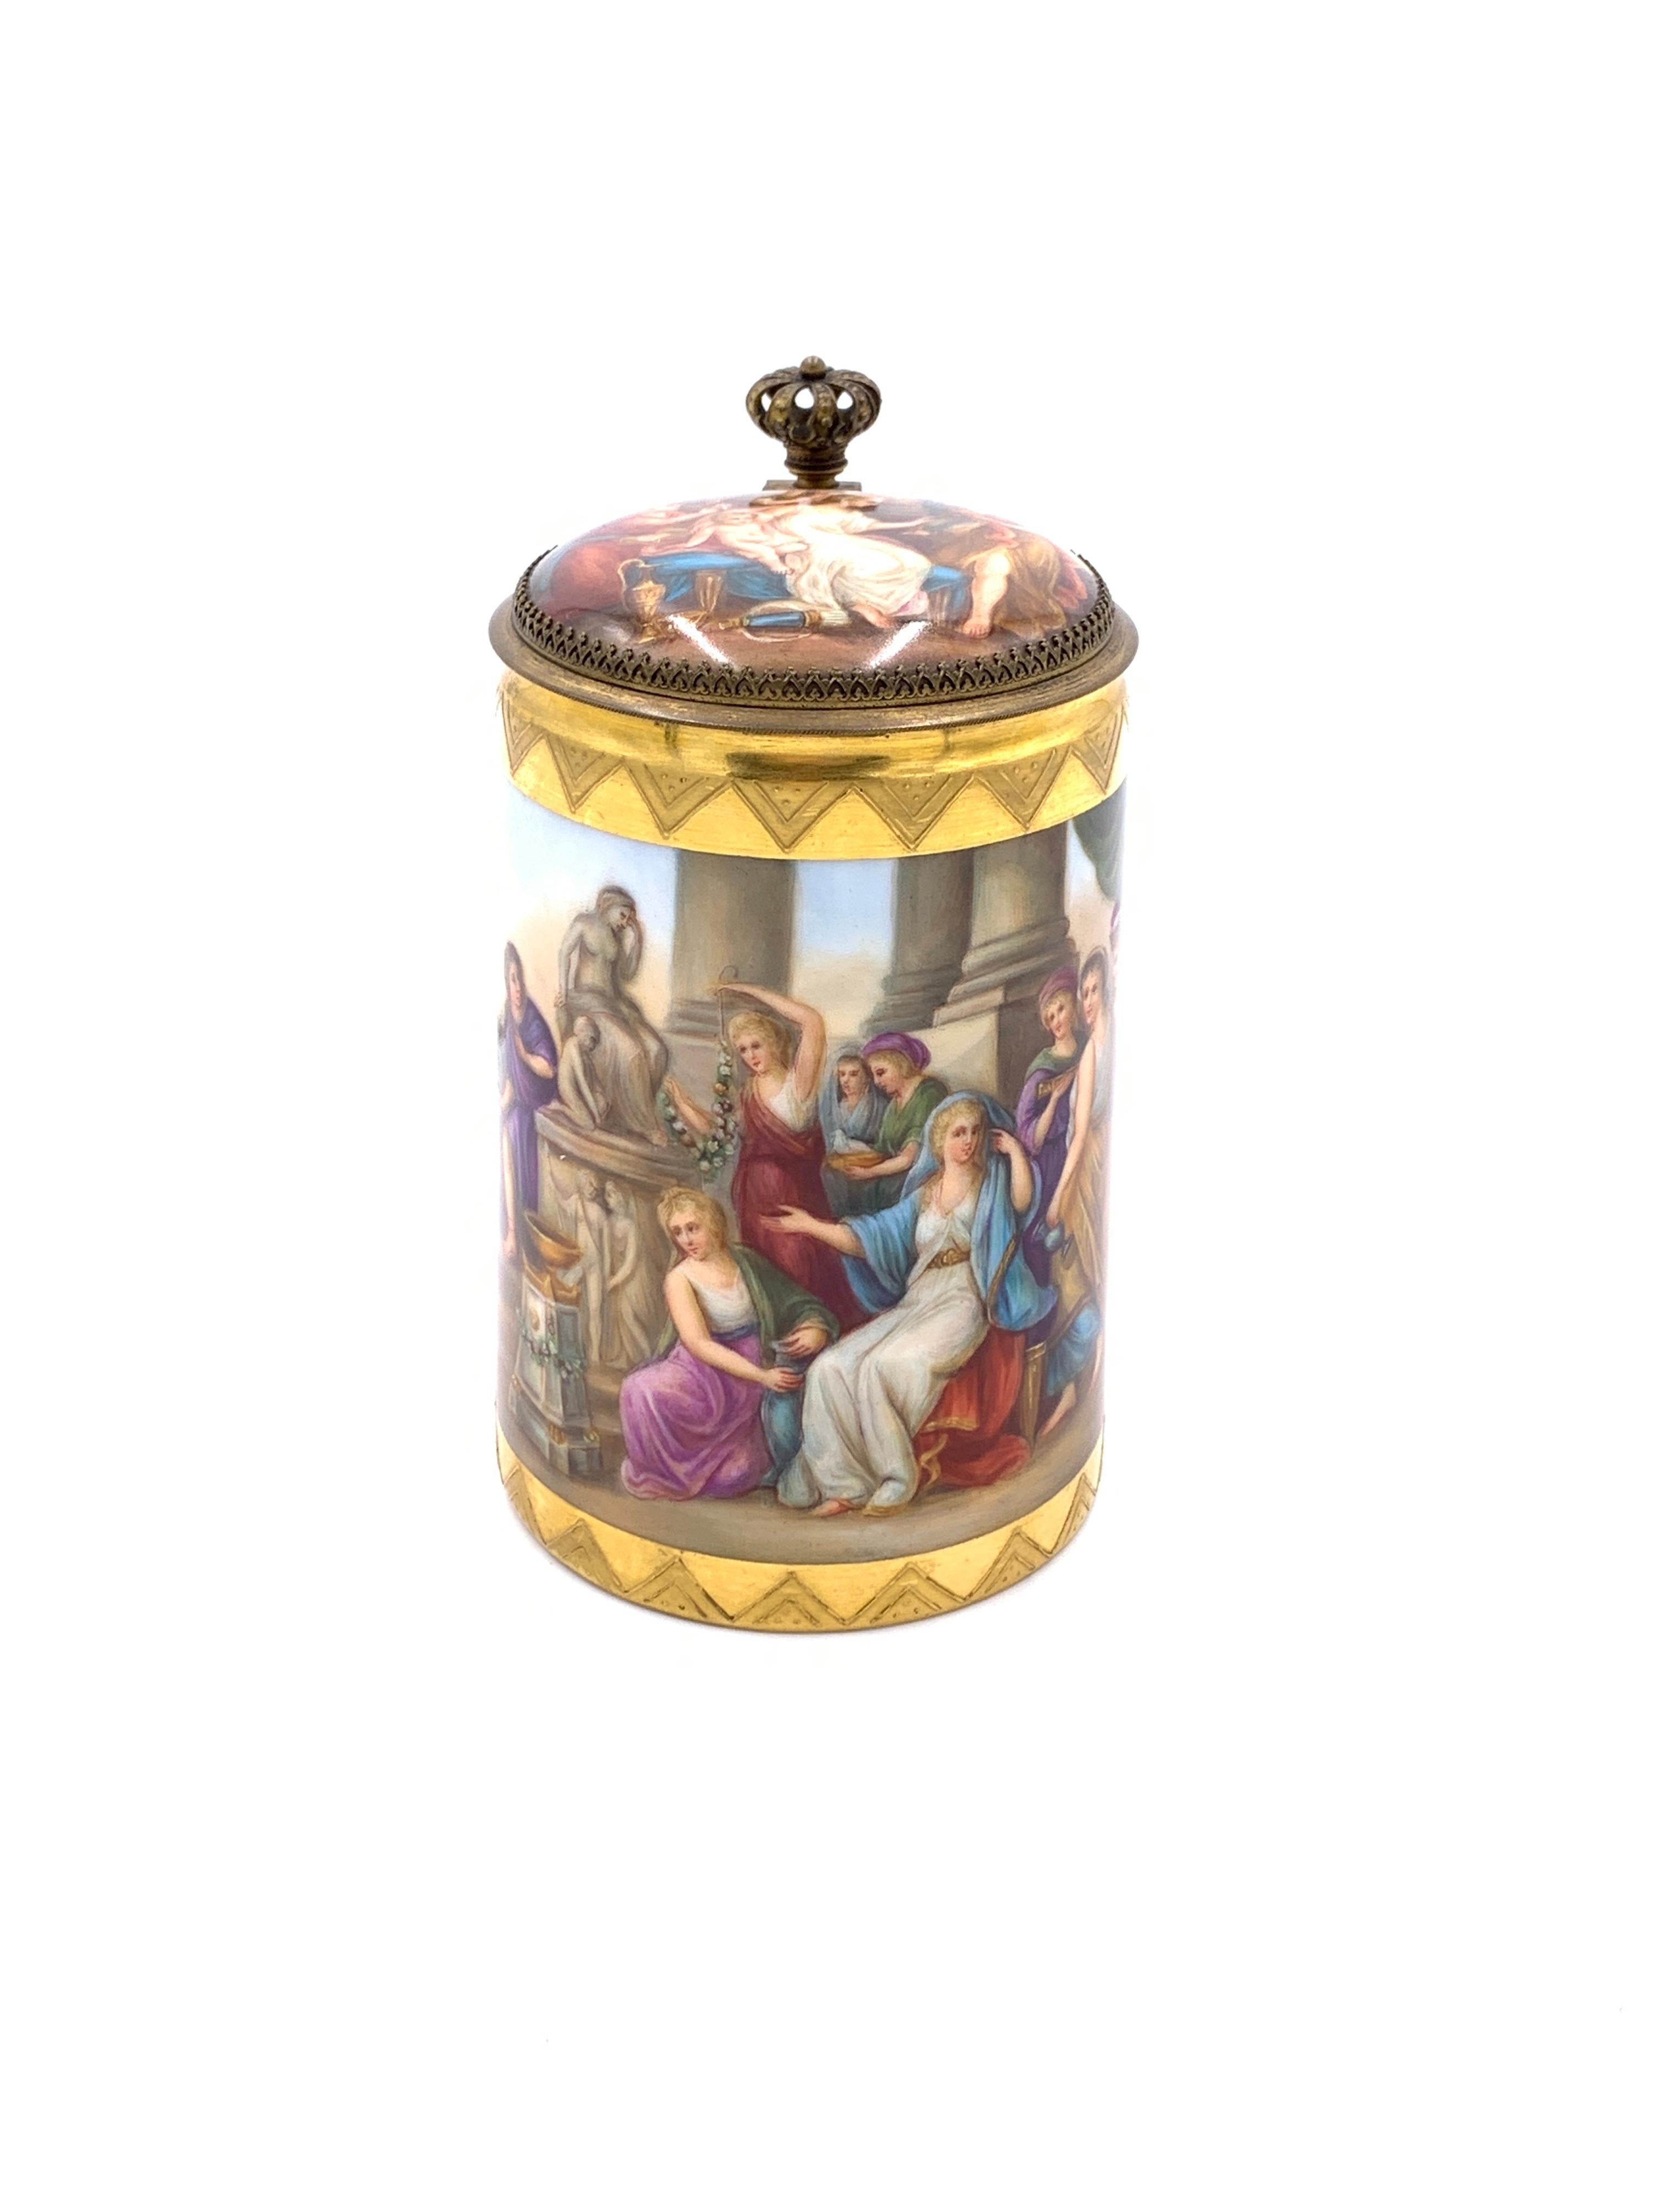 19th century royal Vienna porcelain lidded tankard, gilt metal in the shape of crown above the handle and attached to the lid, decoration all around the out side and on the inner lid, blue beehive mark stamped on the base.
 